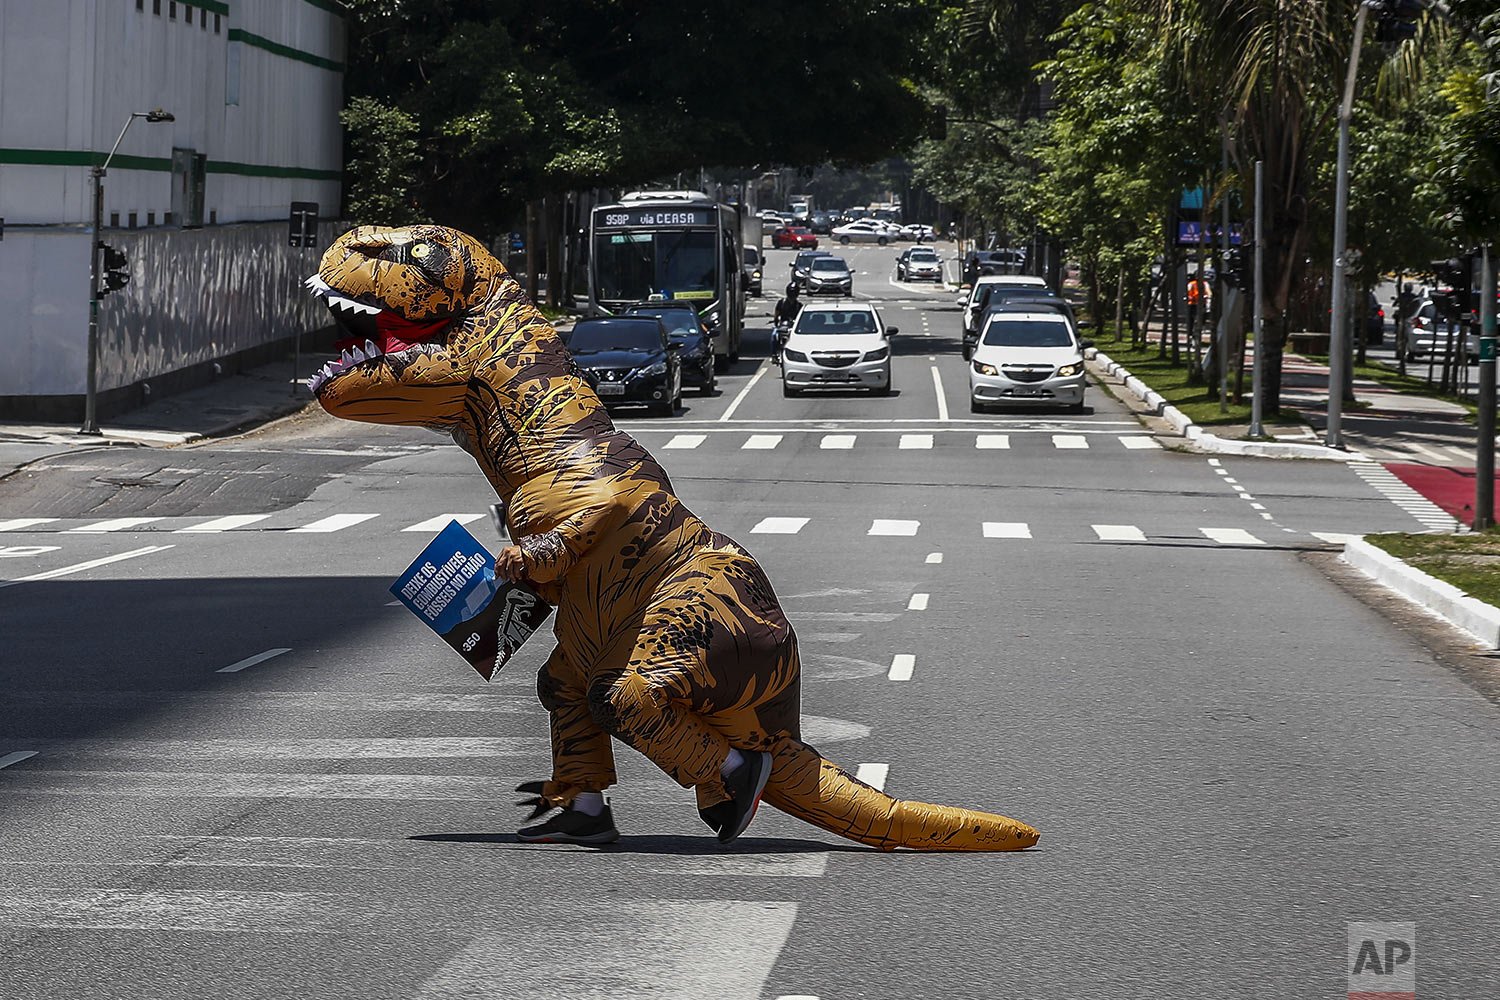  An activist wearing a dinosaur costume carries a sign that reads in Portuguese "Leave fossil fuels in the ground," during a protest demanding banks stop giving loans to companies involved in gas and oil development in the Amazon, in Sao Paulo, Brazi